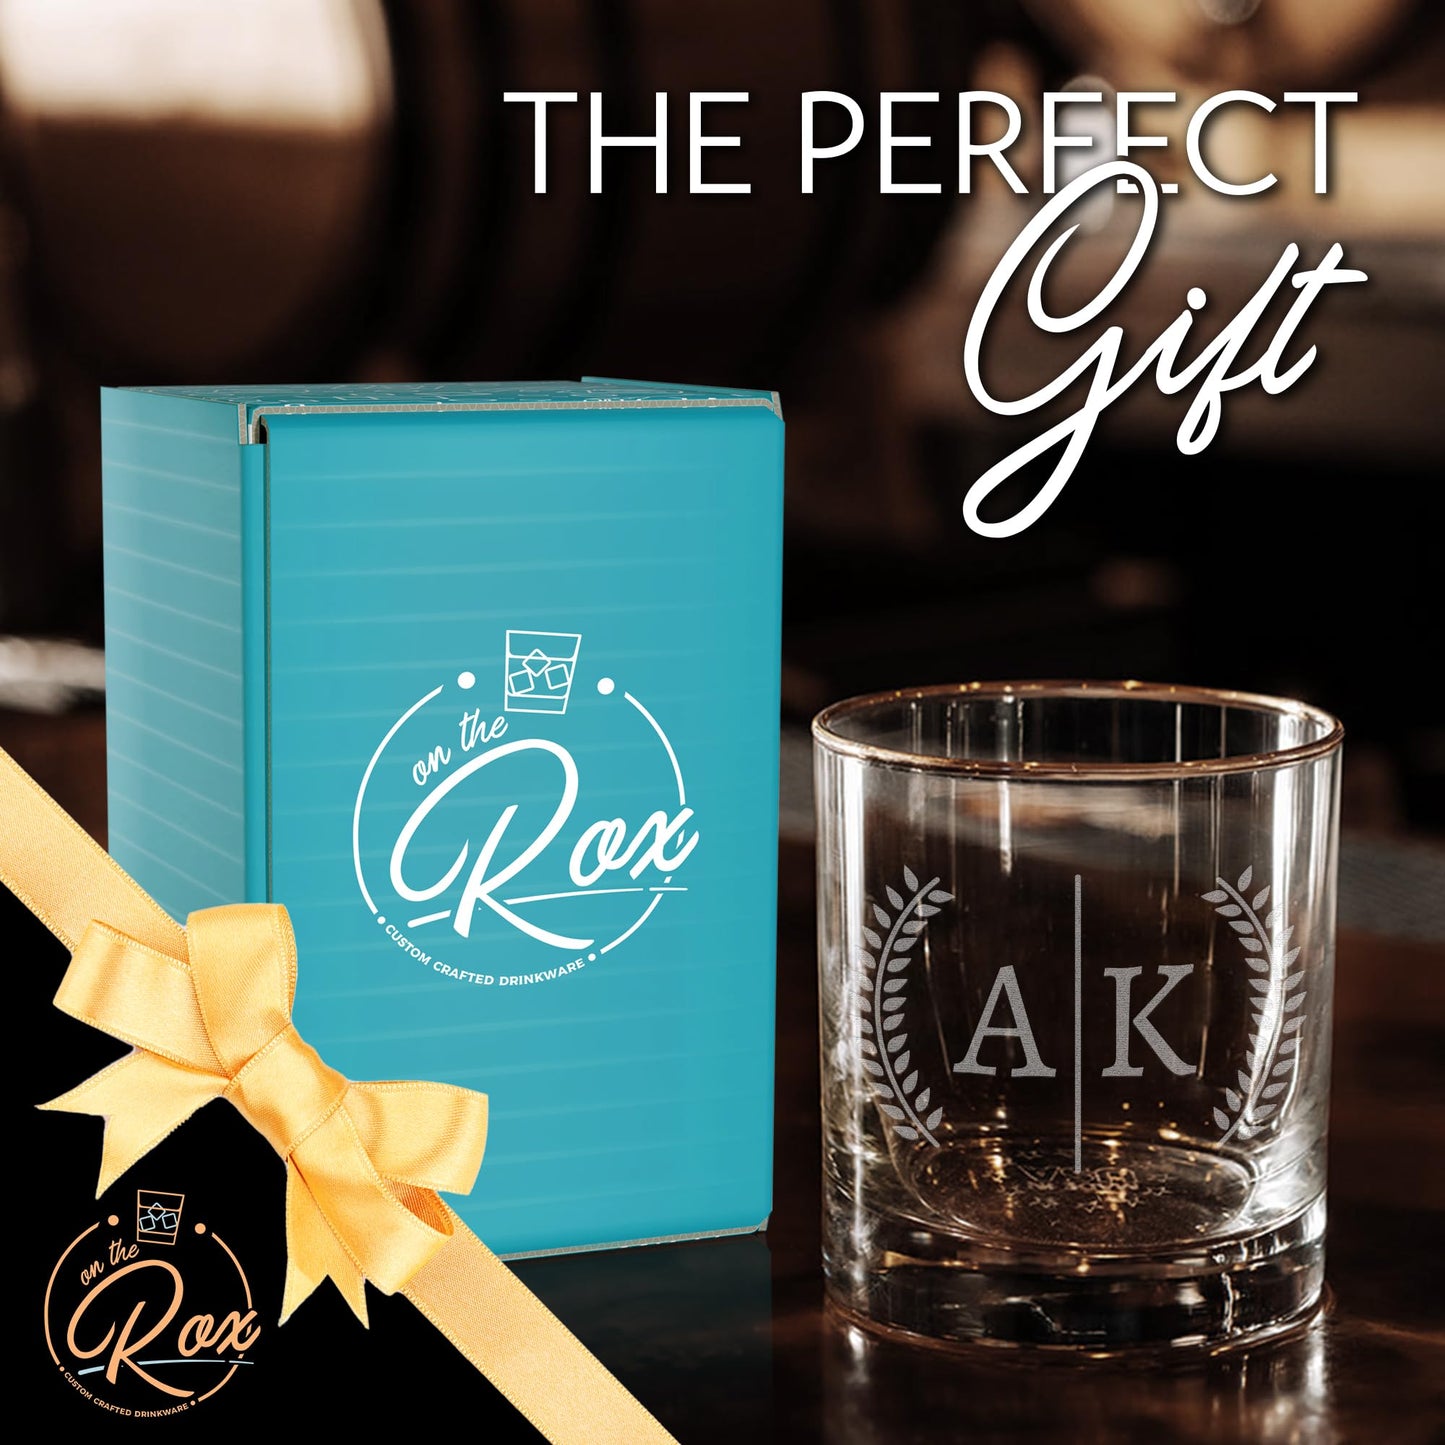 On The Rox Drinks Personalized Whiskey Gifts for Men - 11 oz Engraved Split Monogrammed Whiskey Glass - Customized Cocktail Glass for Christmas, Birthdays, Weddings - Bourbon, Scotch, Rocks, Brandy